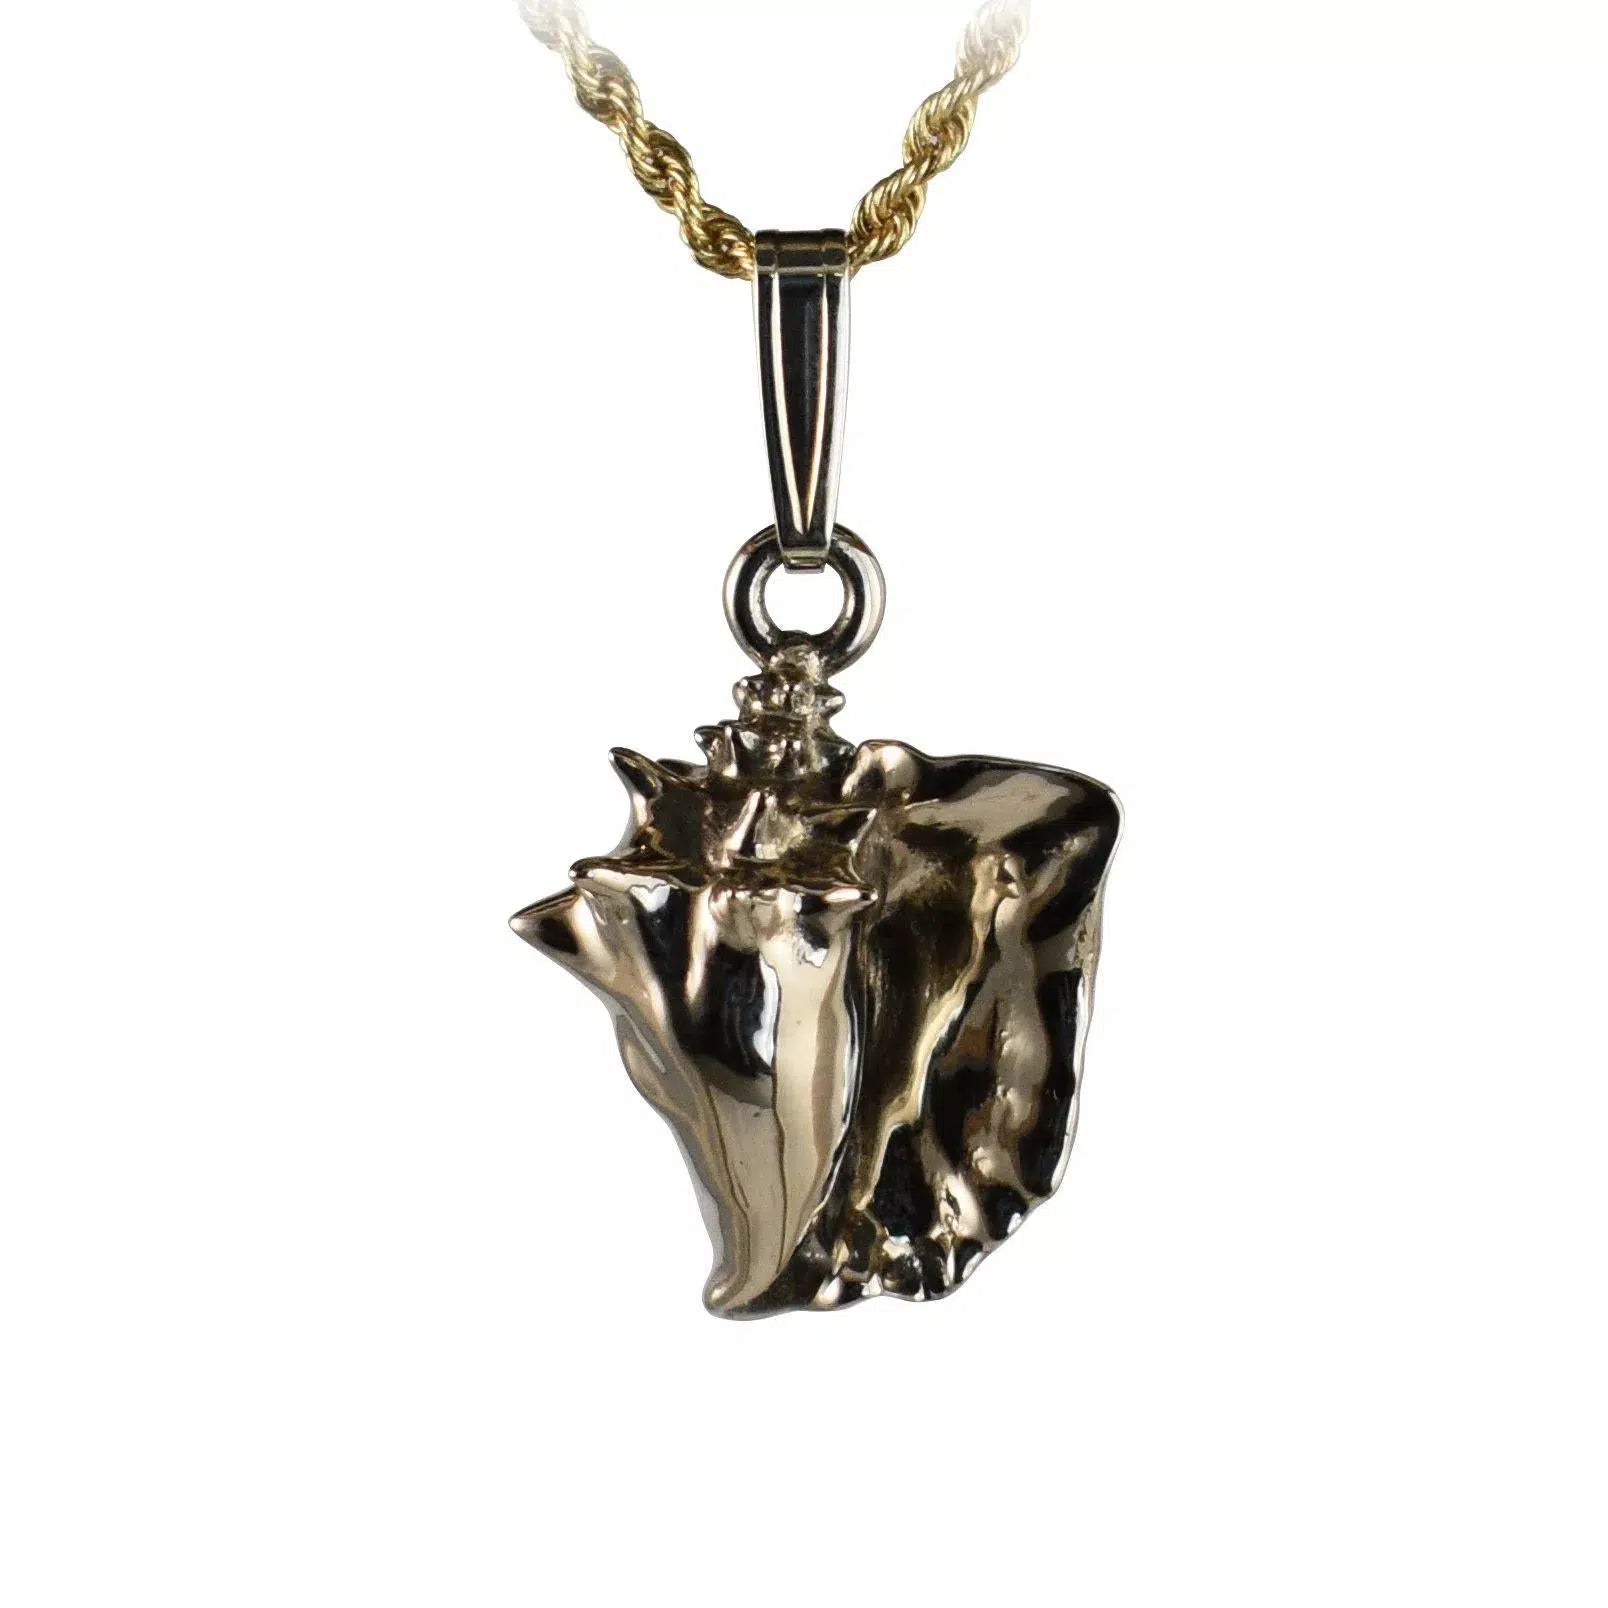 Queen Conch Shell Pendant - Small